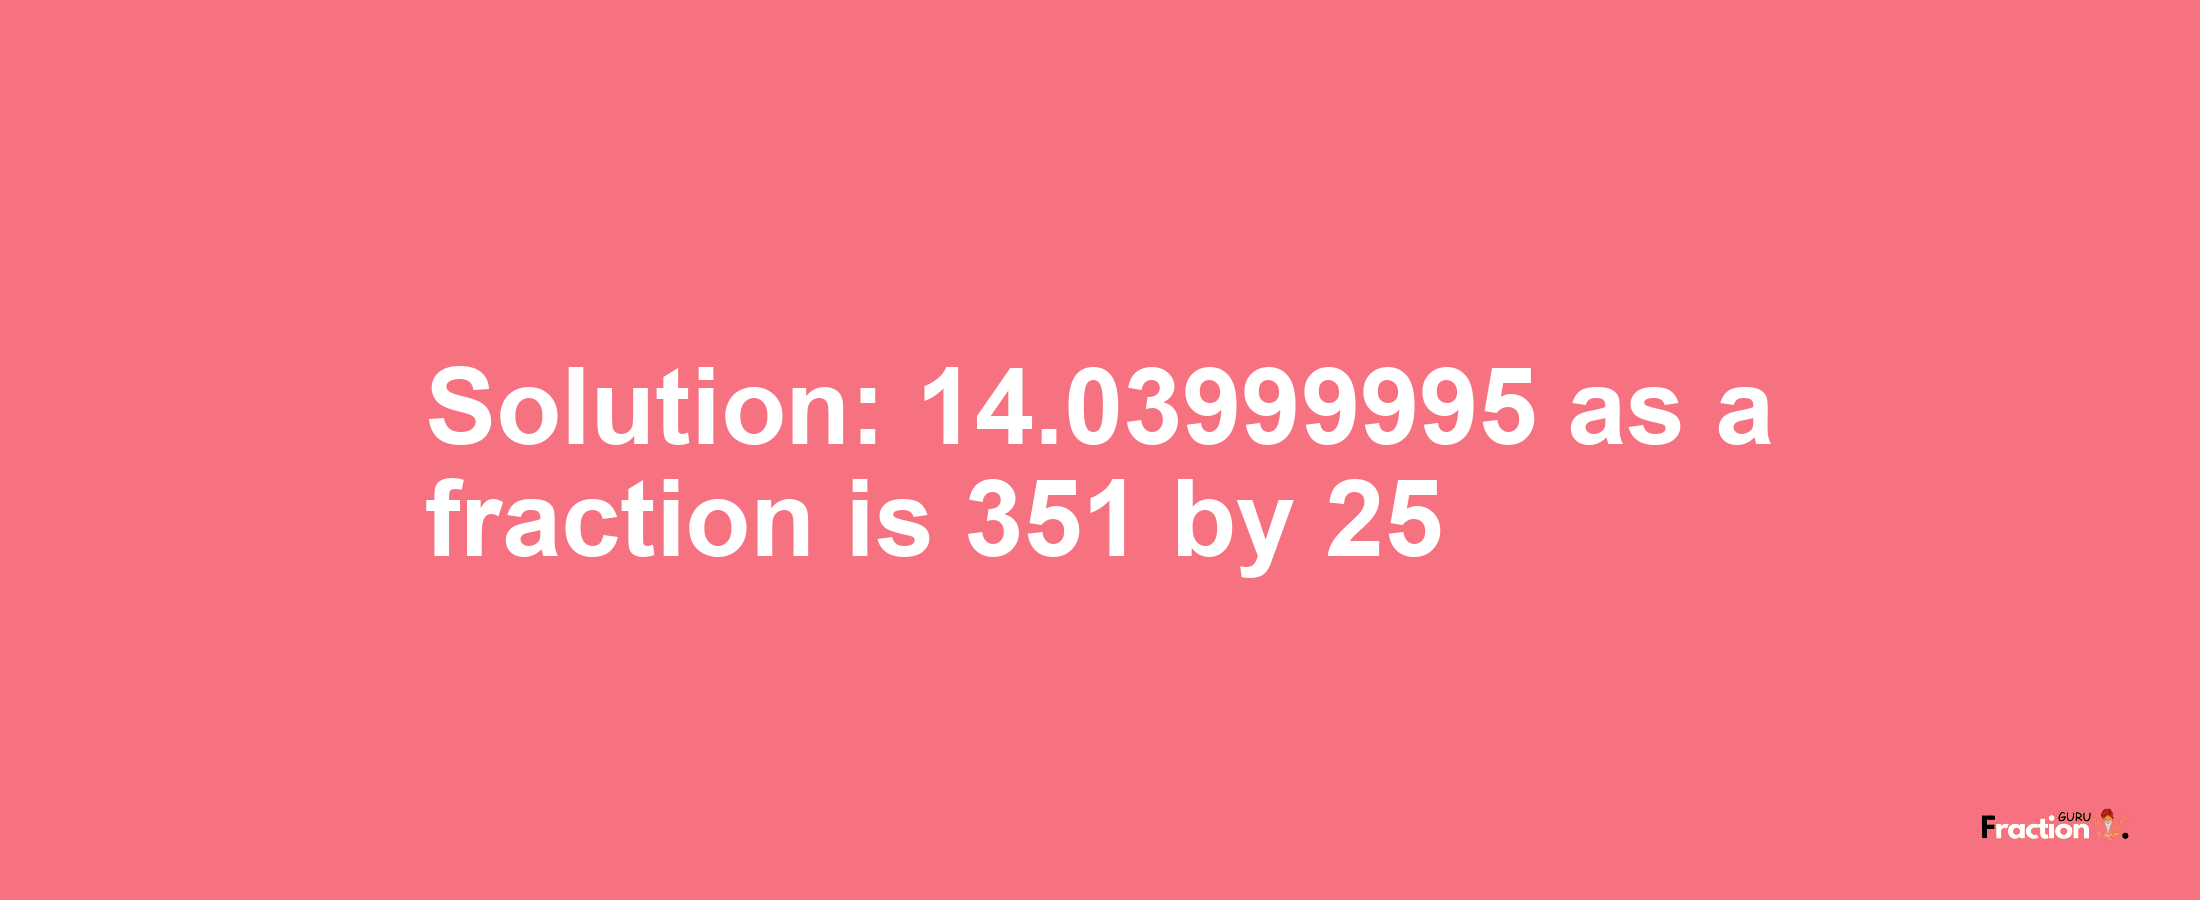 Solution:14.03999995 as a fraction is 351/25